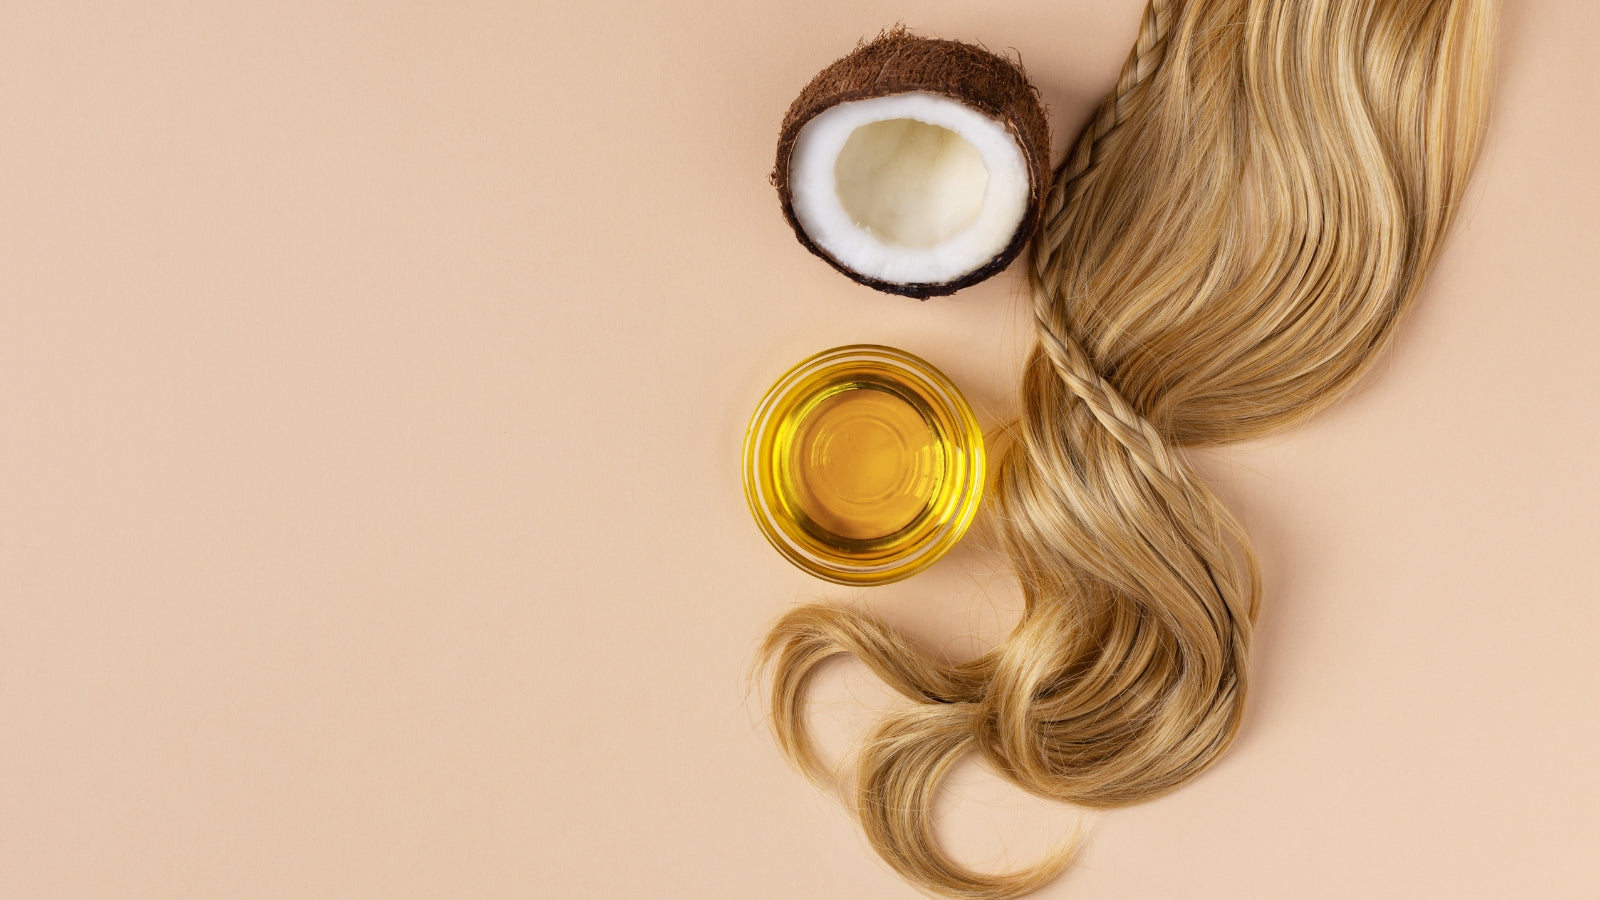 Blonde hair strands, coconut, and glass bowl of oil - ingredients for DIY hair masks